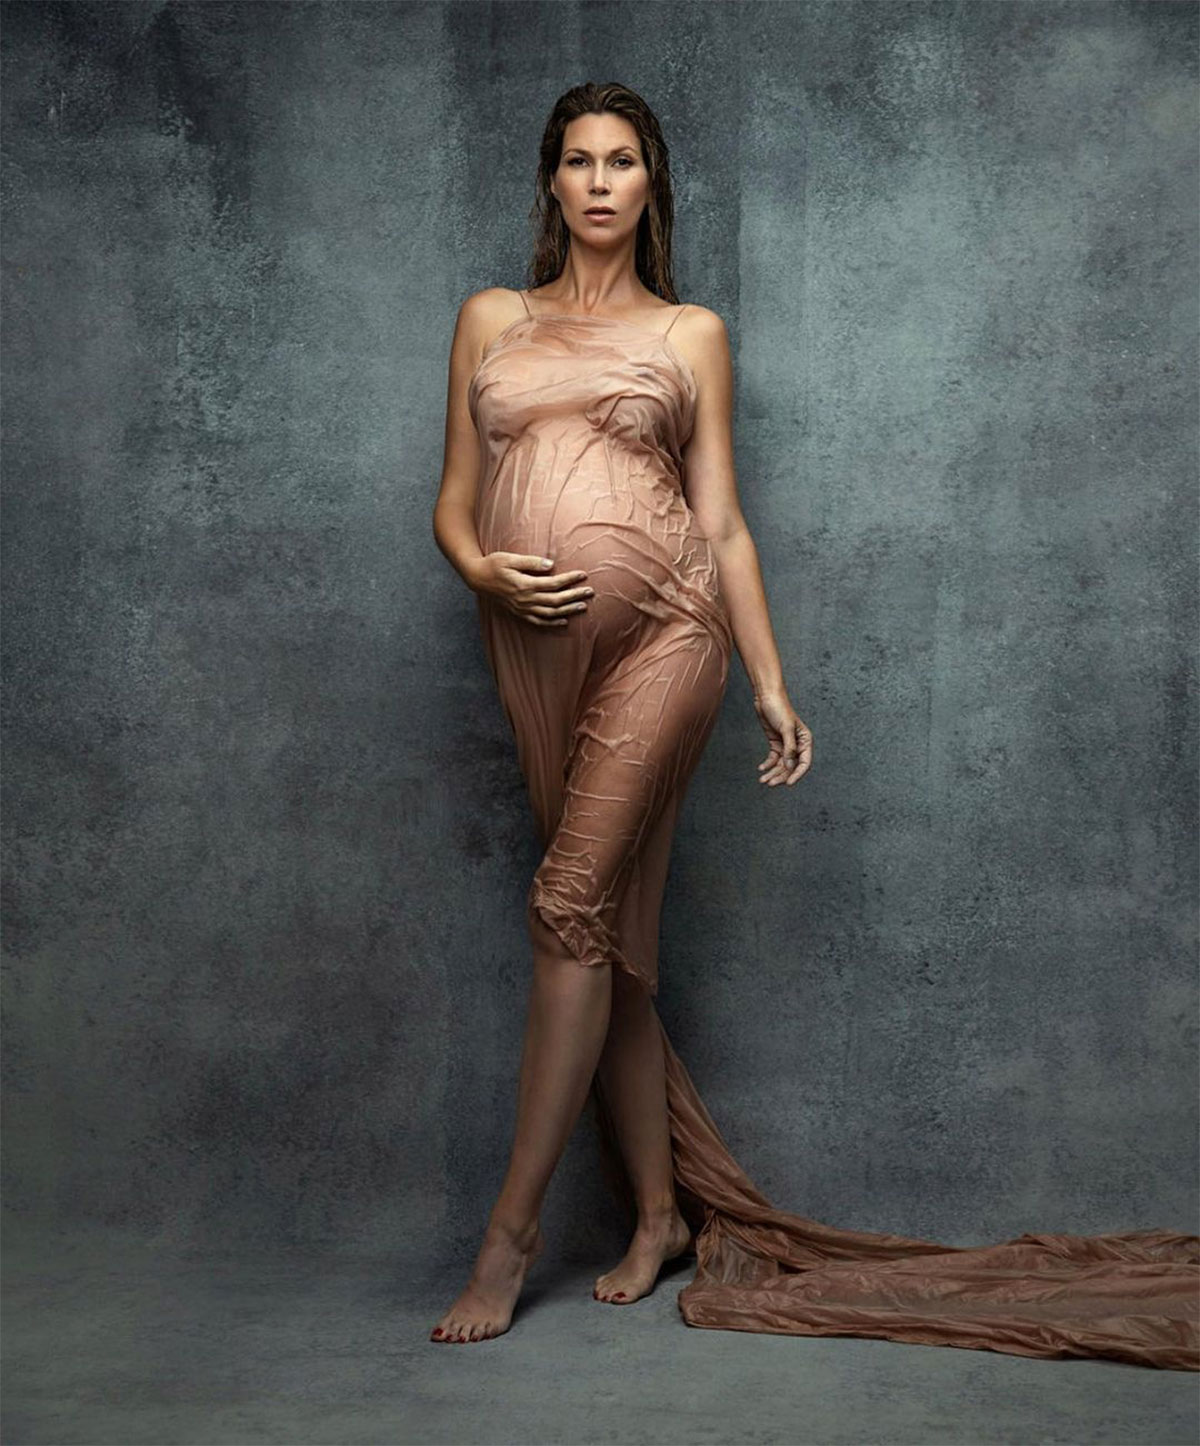 Pregnant Stars' Gorgeous Maternity Shoots Over the Years: Pics